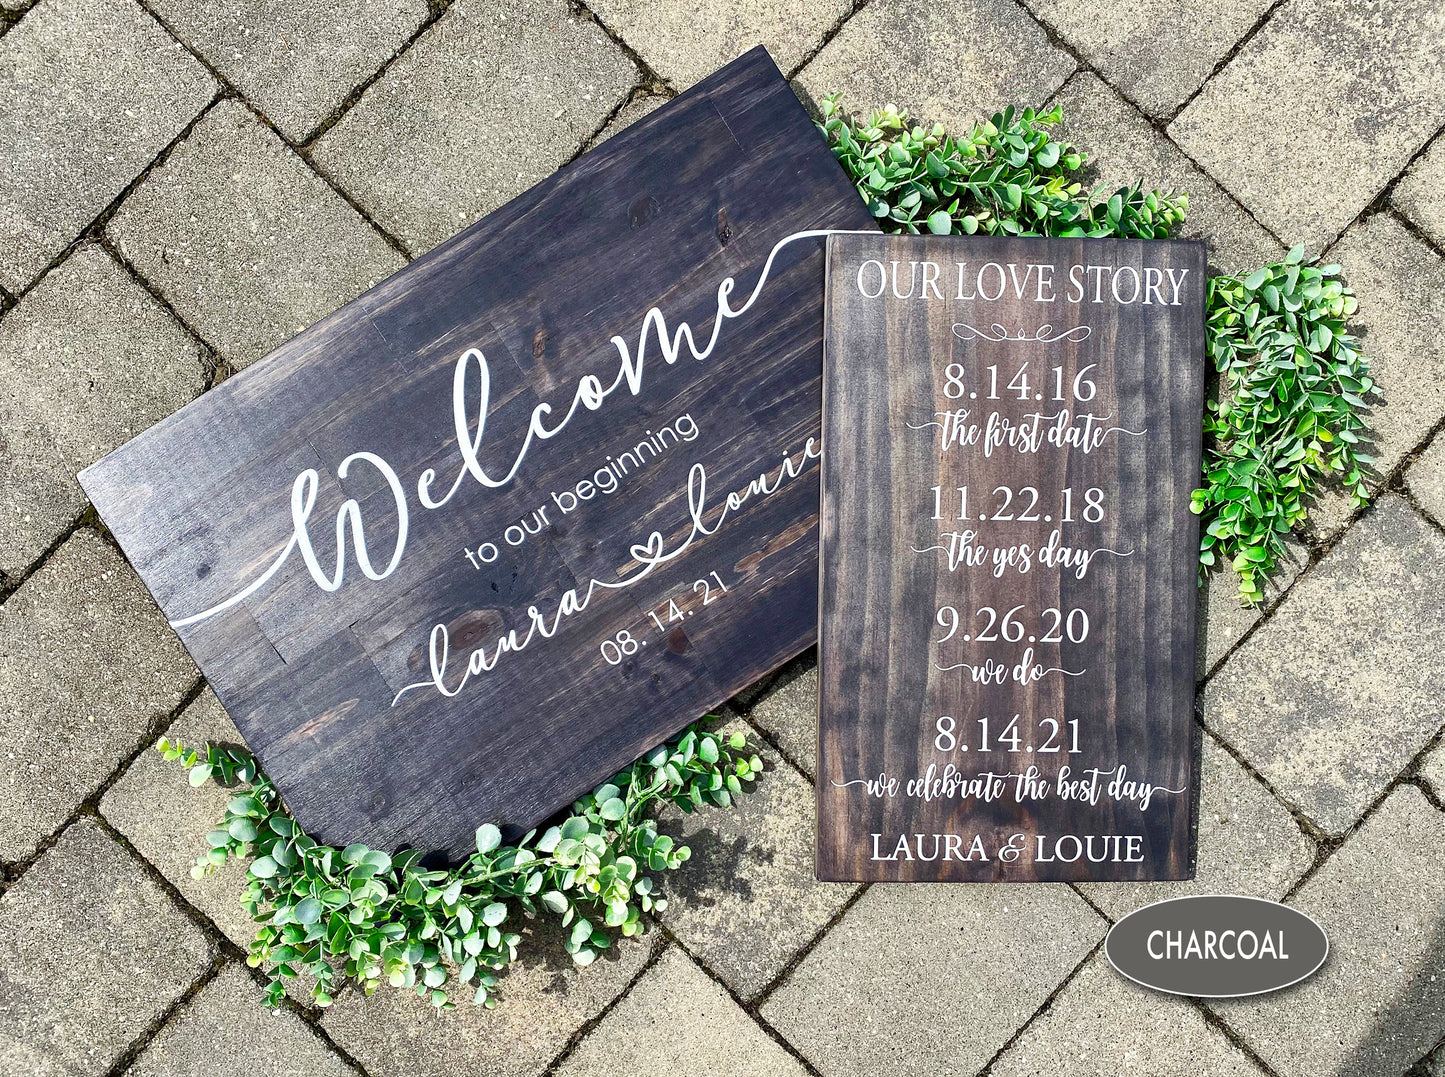 Our Love Story, Custom Wood Sign personalized hand painted with First Date, Engagement Date and Wedding Date, Great Gift!